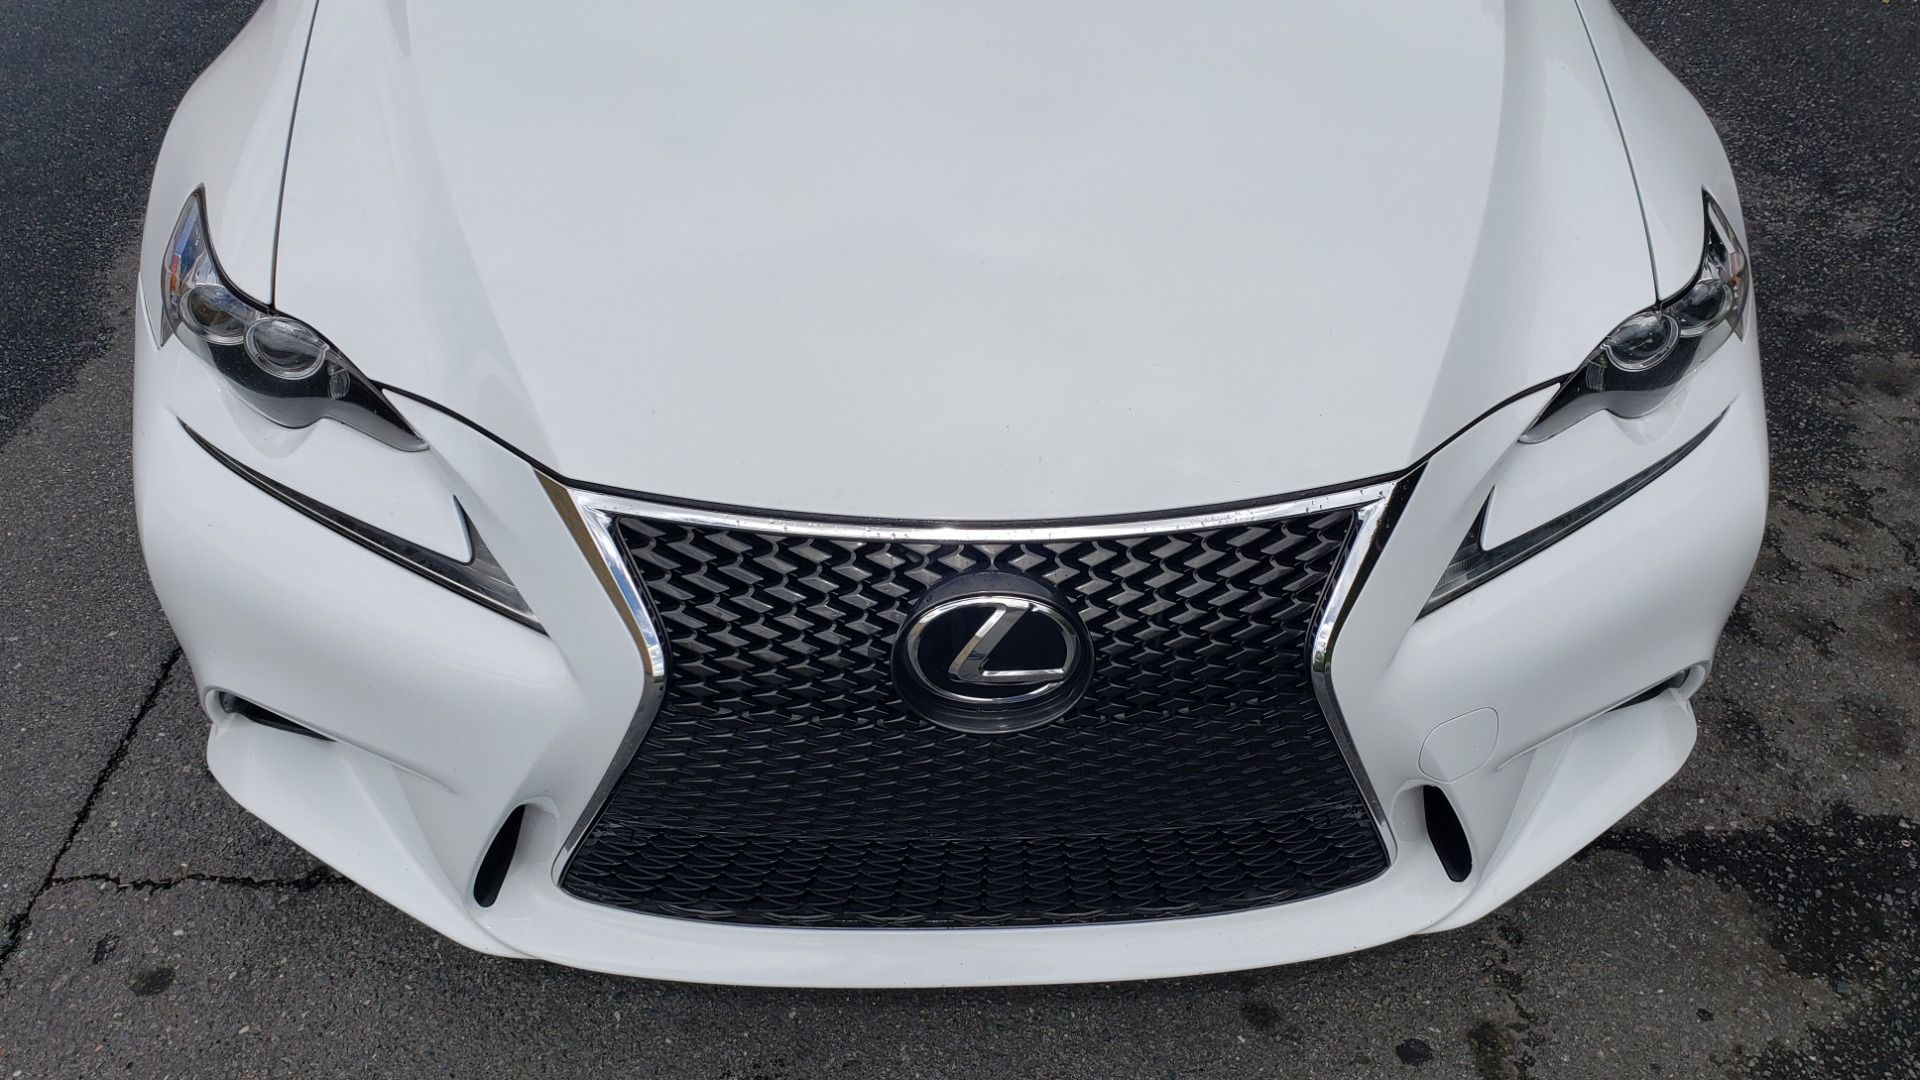 Used 2014 Lexus IS 350 F-SPORT / NAV / SUNROOF / REARVIEW / BSM / MARK LEV SND for sale Sold at Formula Imports in Charlotte NC 28227 14